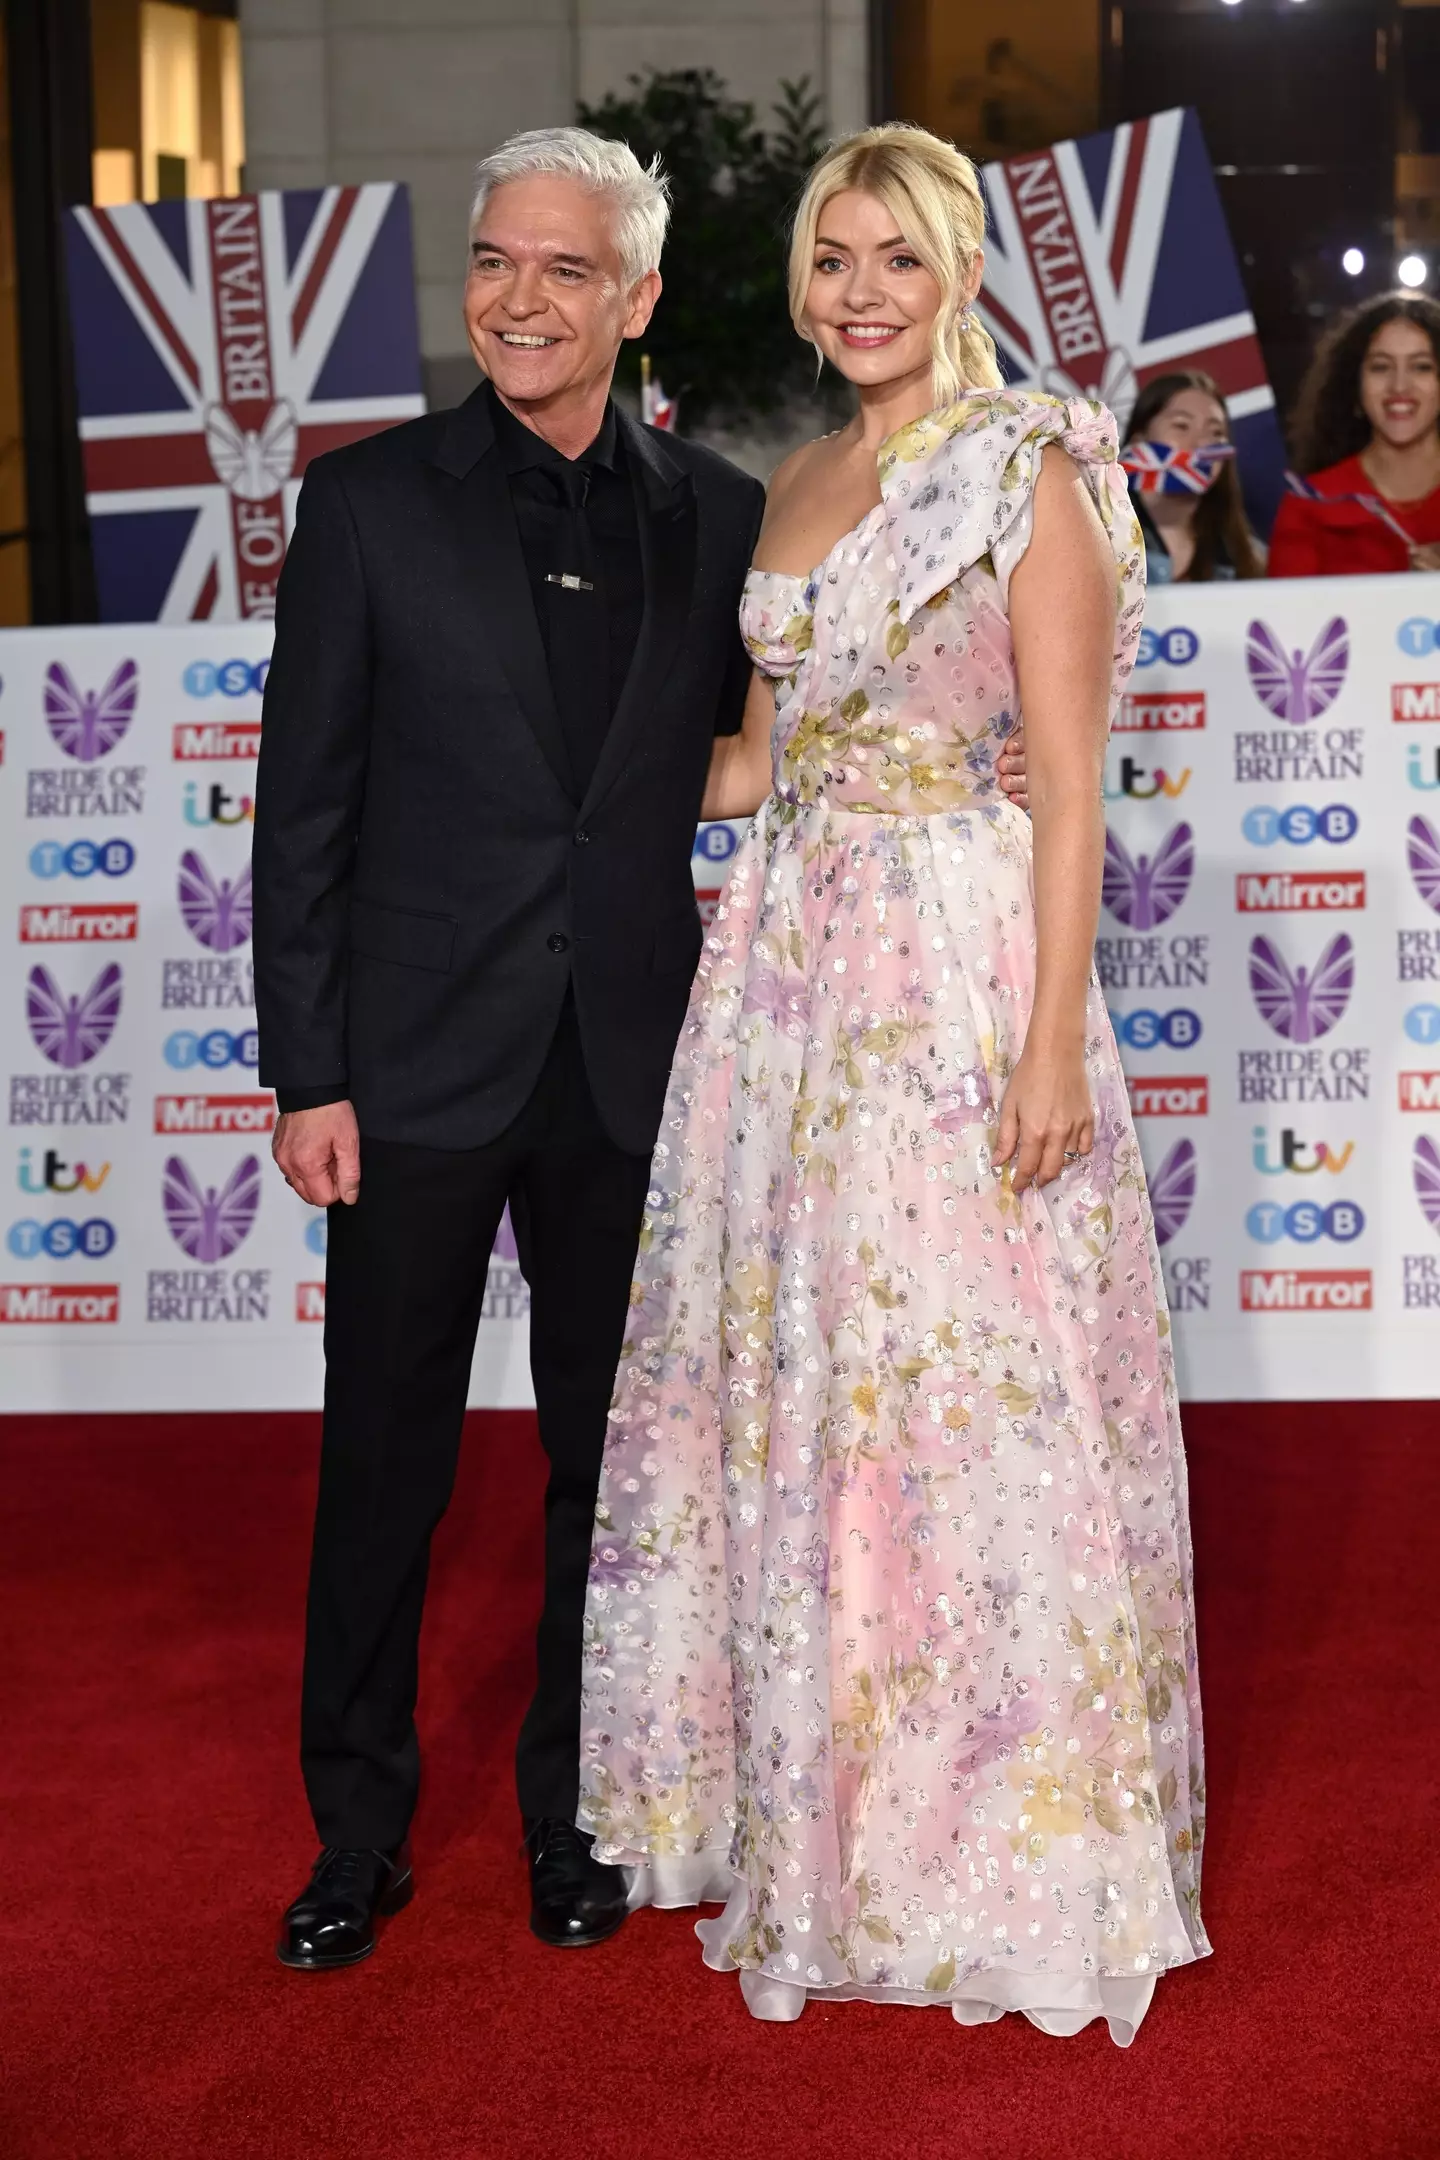 The pair had been long-listed for the best TV presenter prize at the NTAs.